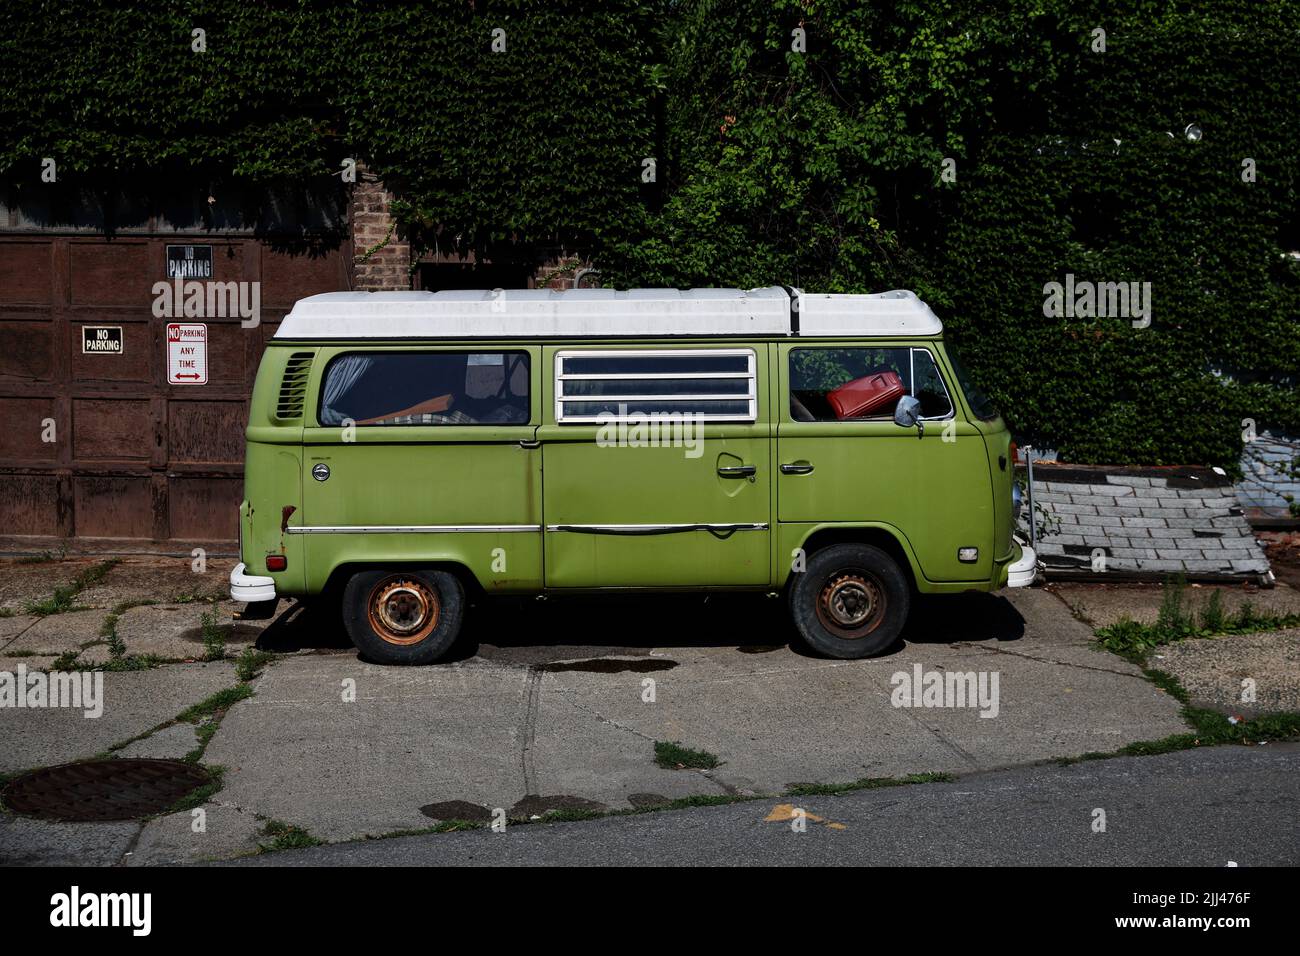 A Volkswagen Bus, one the German motor vehicle manufacturer's original models brought to the market in the 1950s, sits on a sidewalk in Troy, New York, U.S., July 22, 2022. REUTERS/Shannon Stapleton Stock Photo